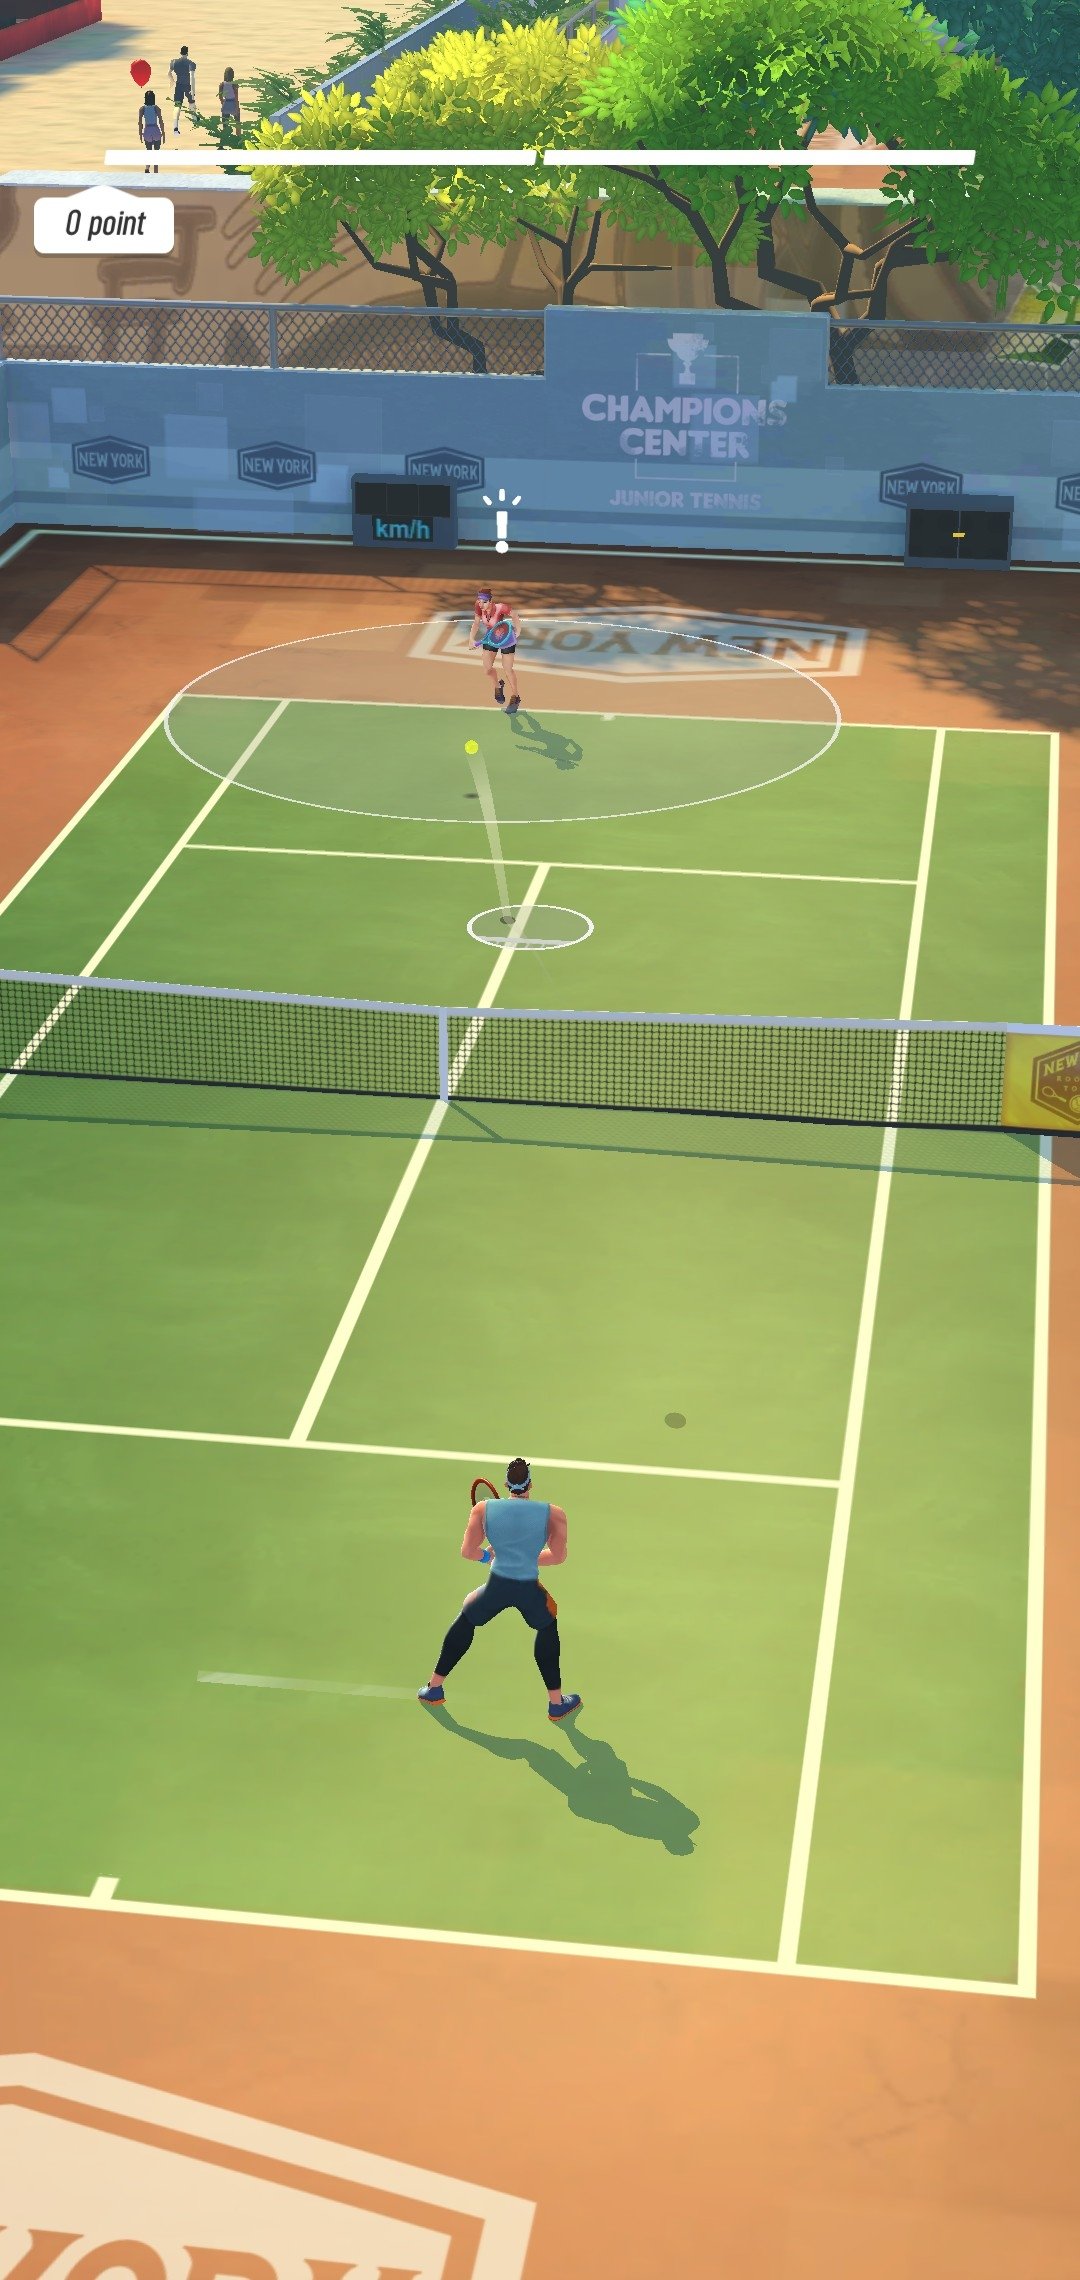 53 HQ Images How To Play Tennis Clash : People Have Been Complaining About This Game Being Pay To Win I Am A Free To Play Player And This Is My Stats After 2 Weeks Into Tennis Clash Free To Play